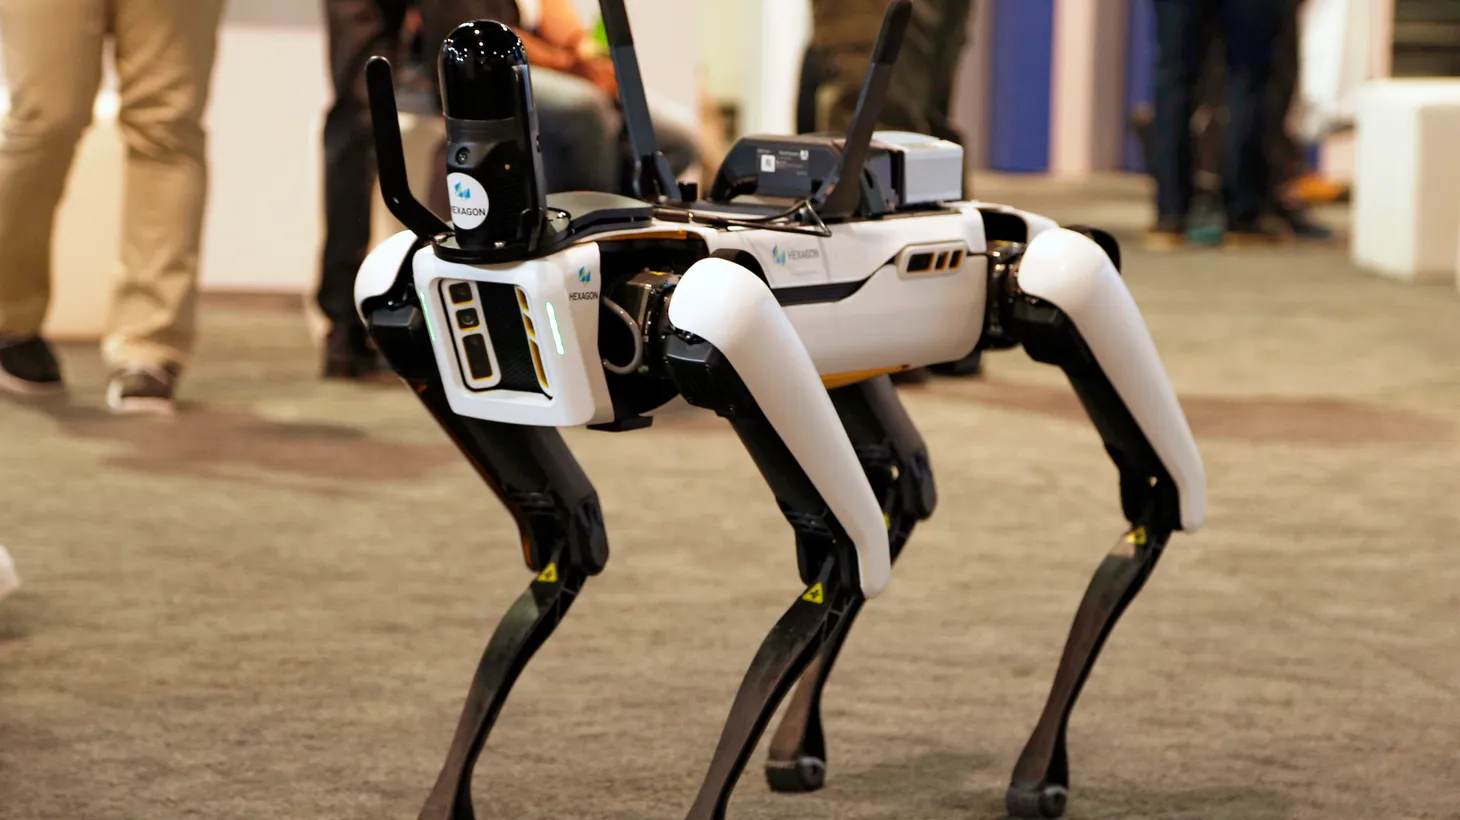 “If you want to spark a frothy conversation in Los Angeles, there's two reliably evergreen topics: law enforcement and animals. This brought them together,” says Jon Regardie of the robot dog debate in the LA City Council.